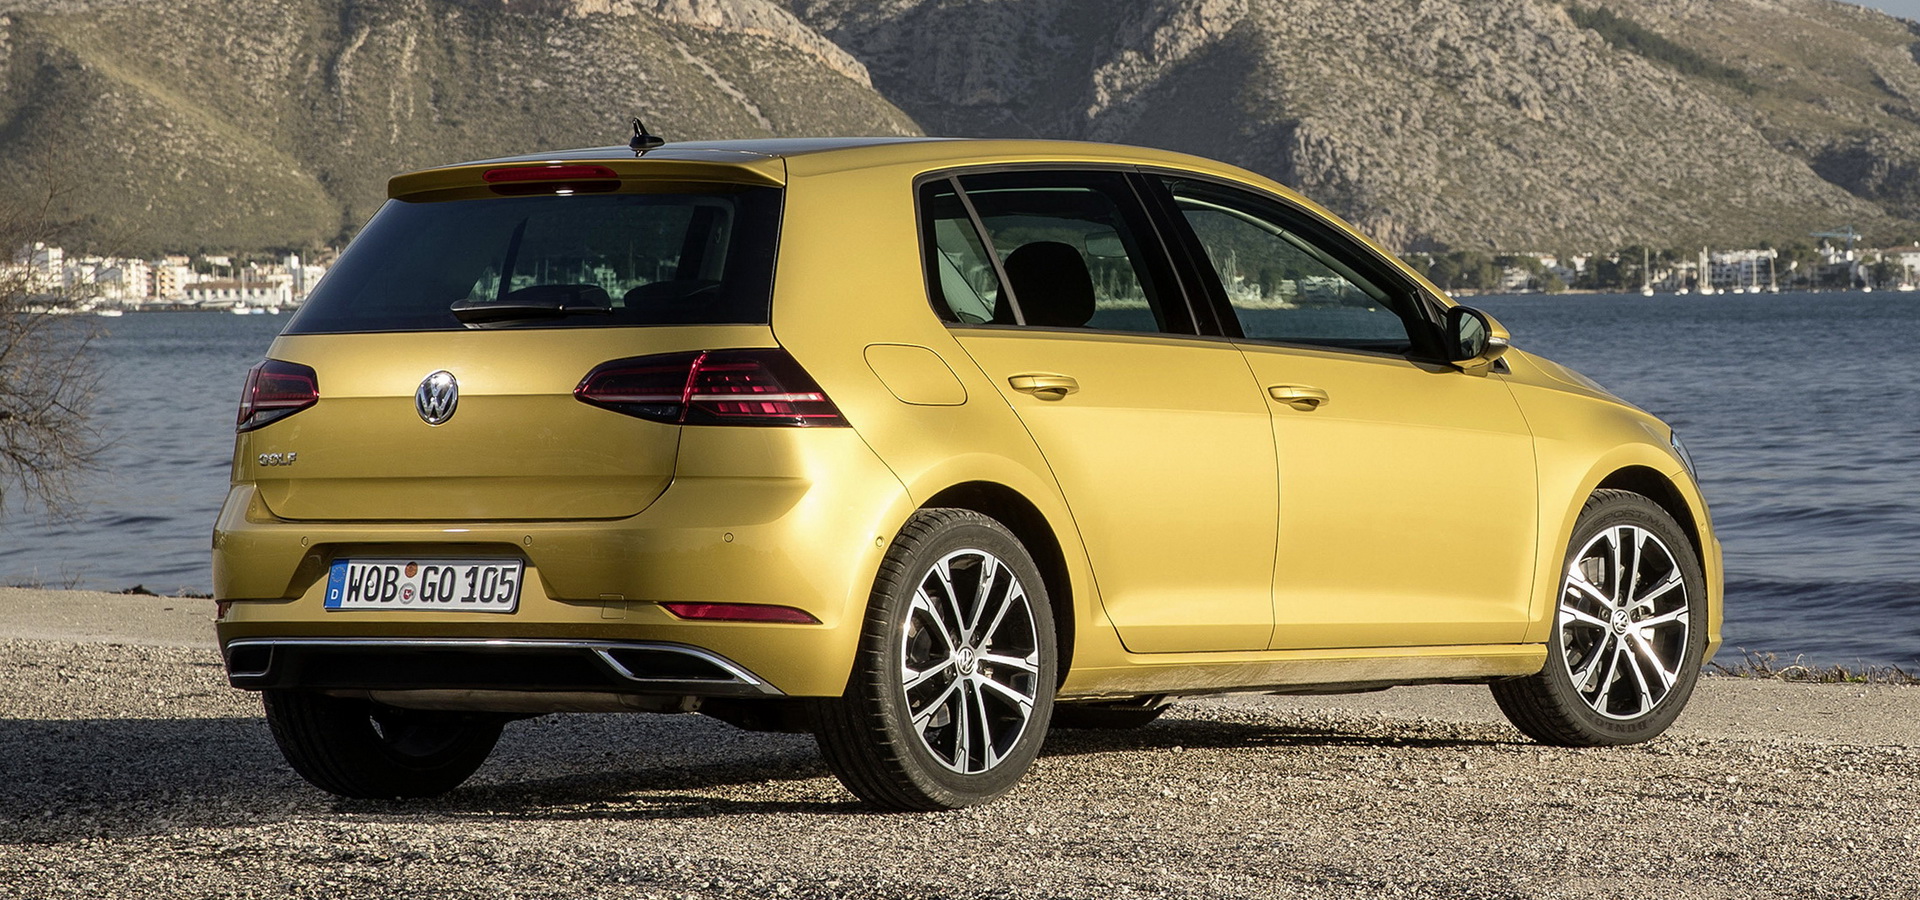 Klant financiën Premier We Compare The 2020 VW Golf Mk8 To The Outgoing Golf Mk7 | Carscoops